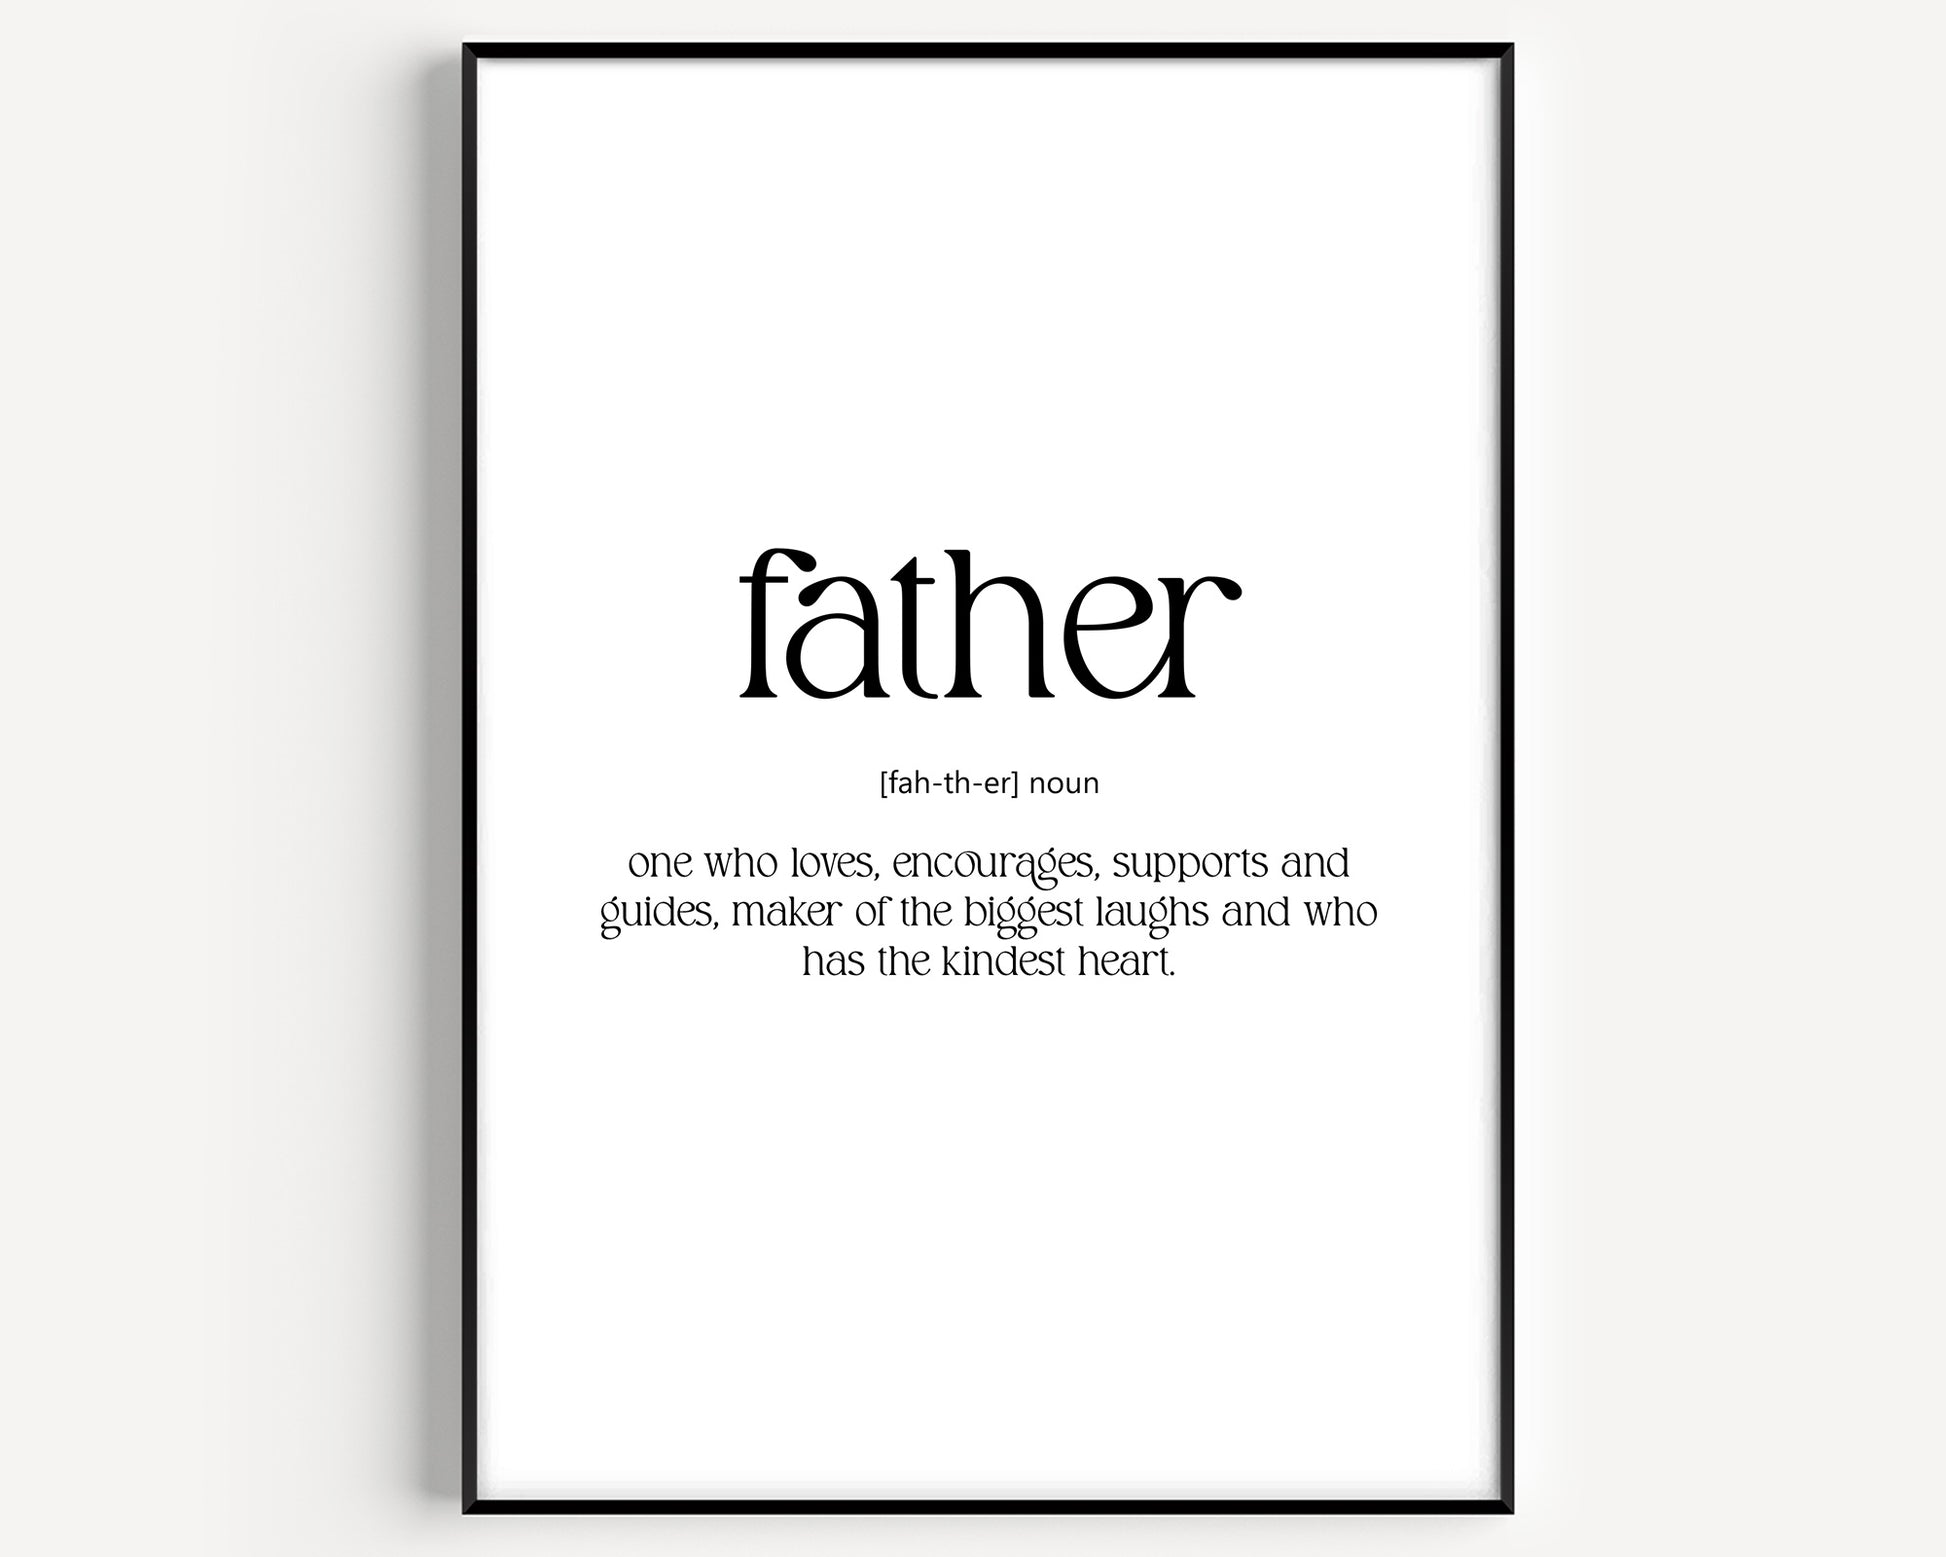 Father Definition Print - Magic Posters